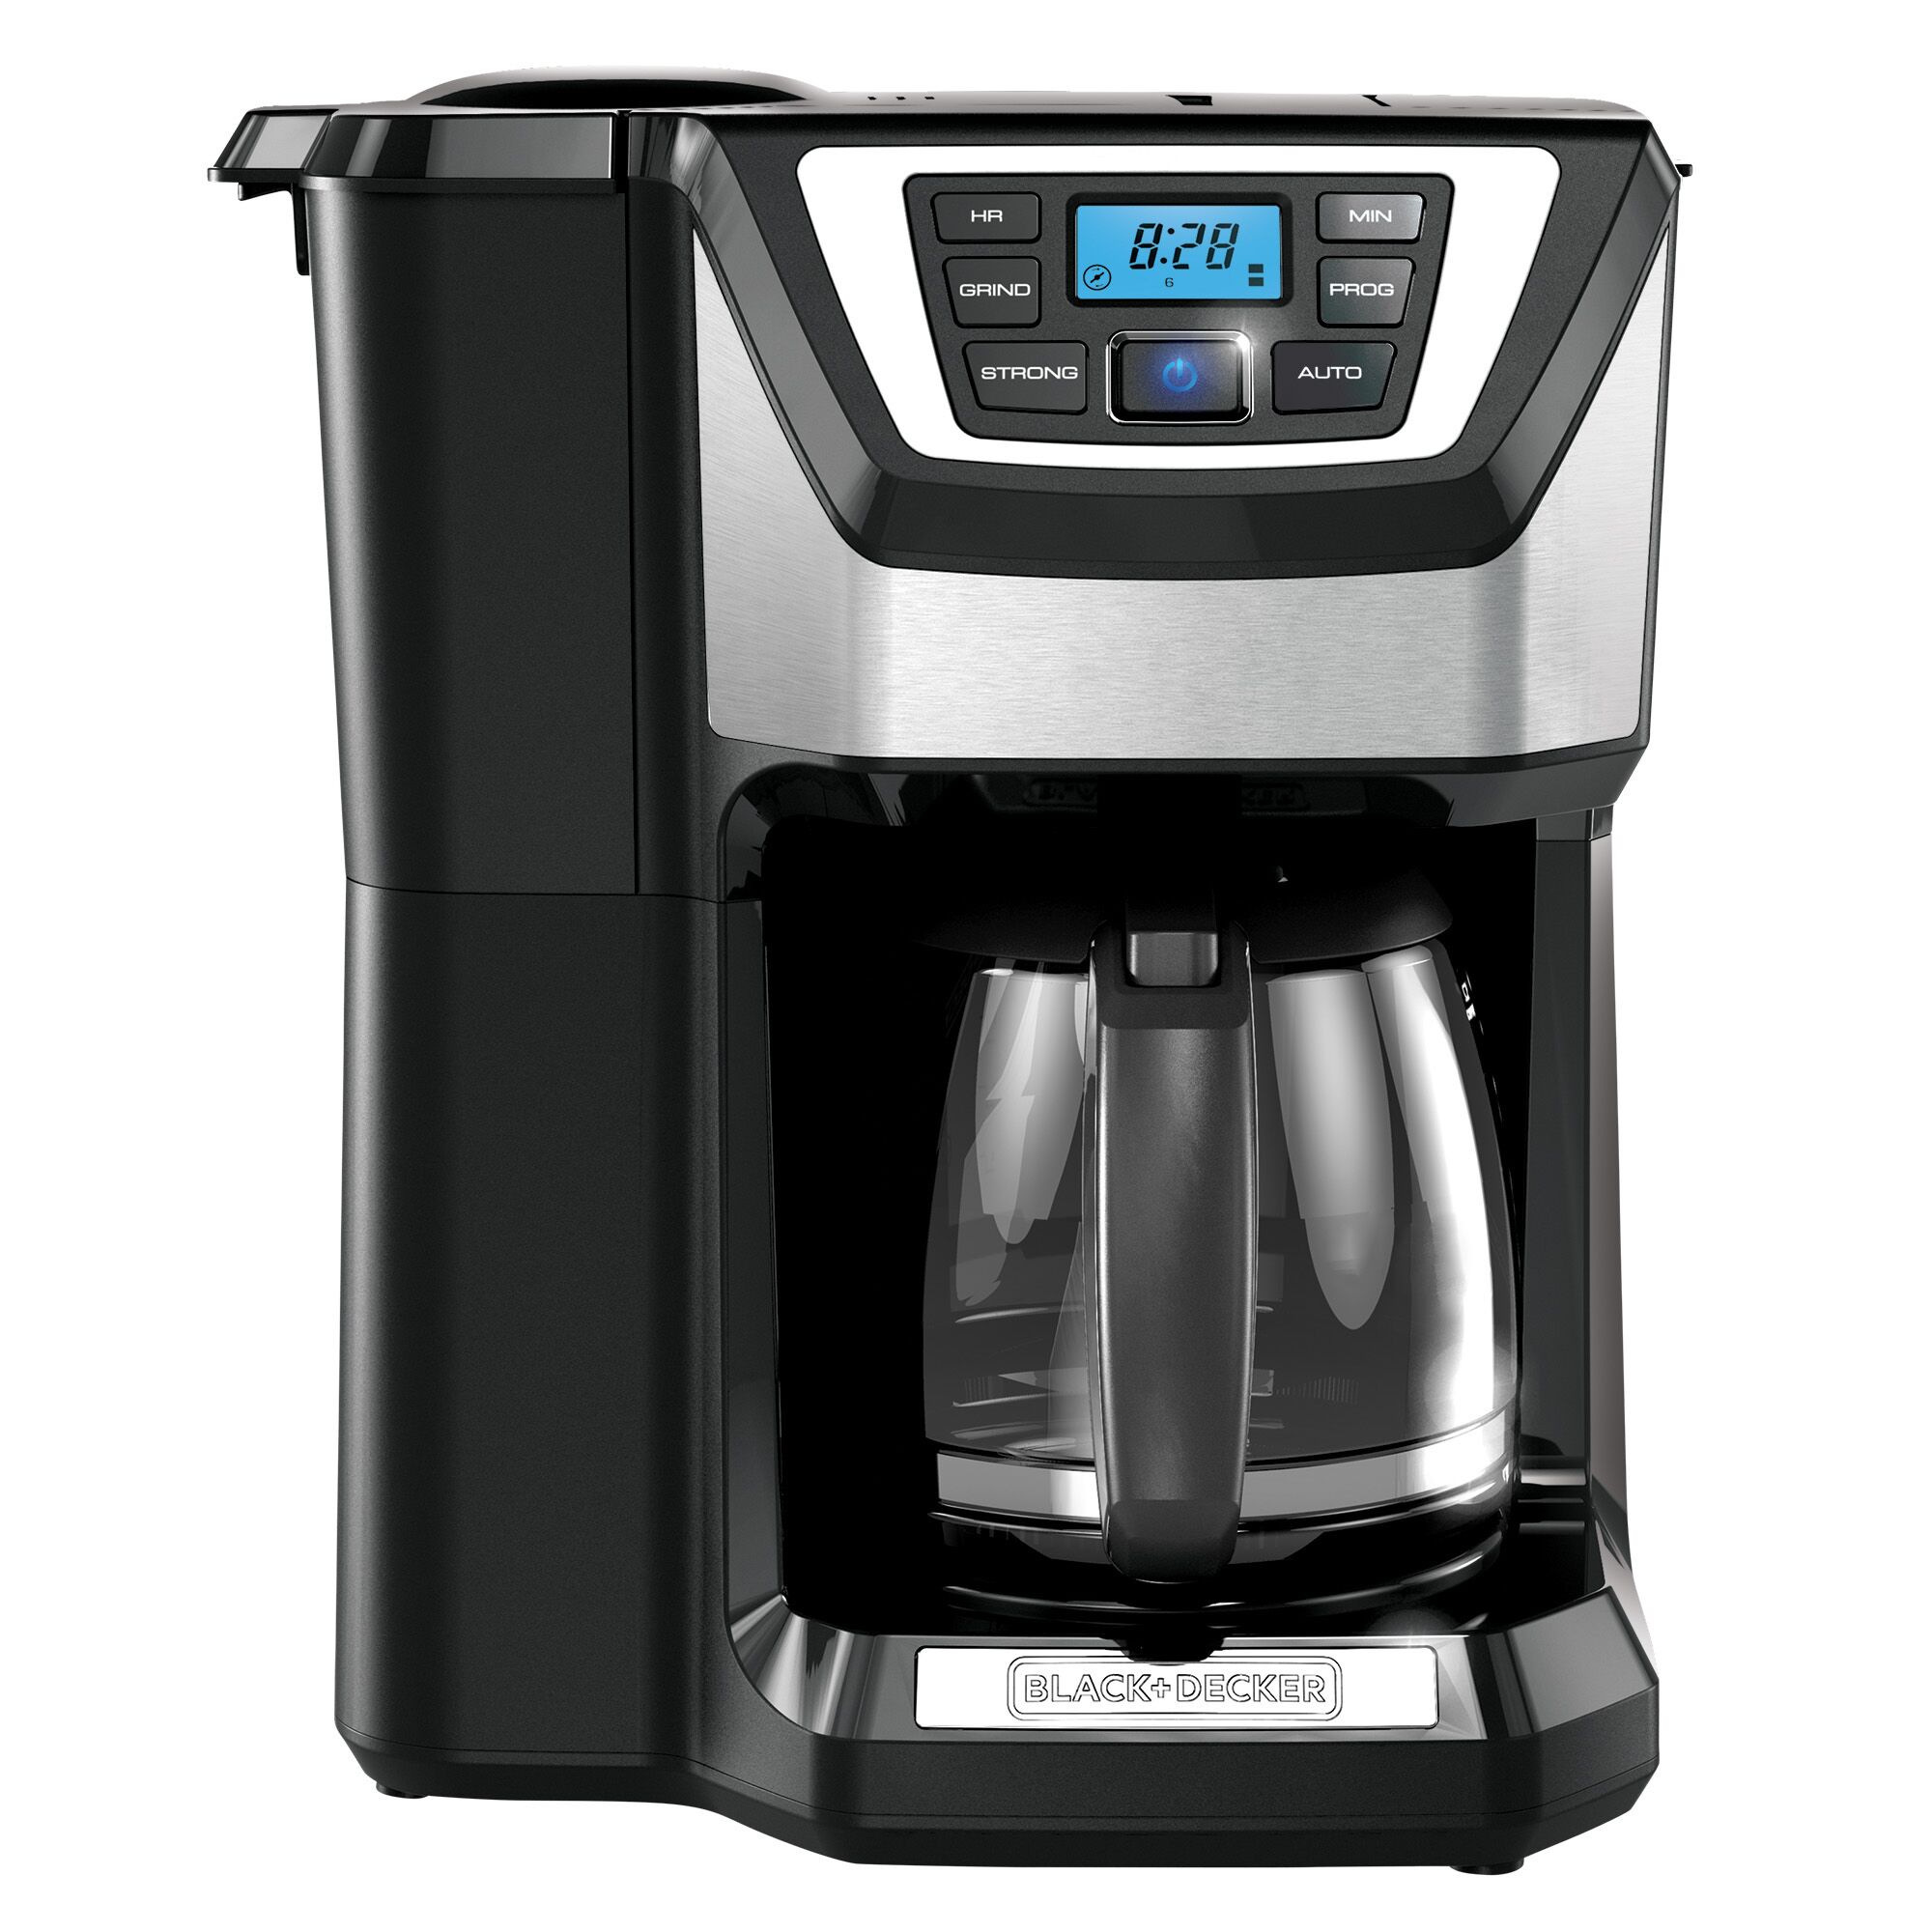 Profile of the BLACK+DECKER 12 cup mill + brew coffee maker